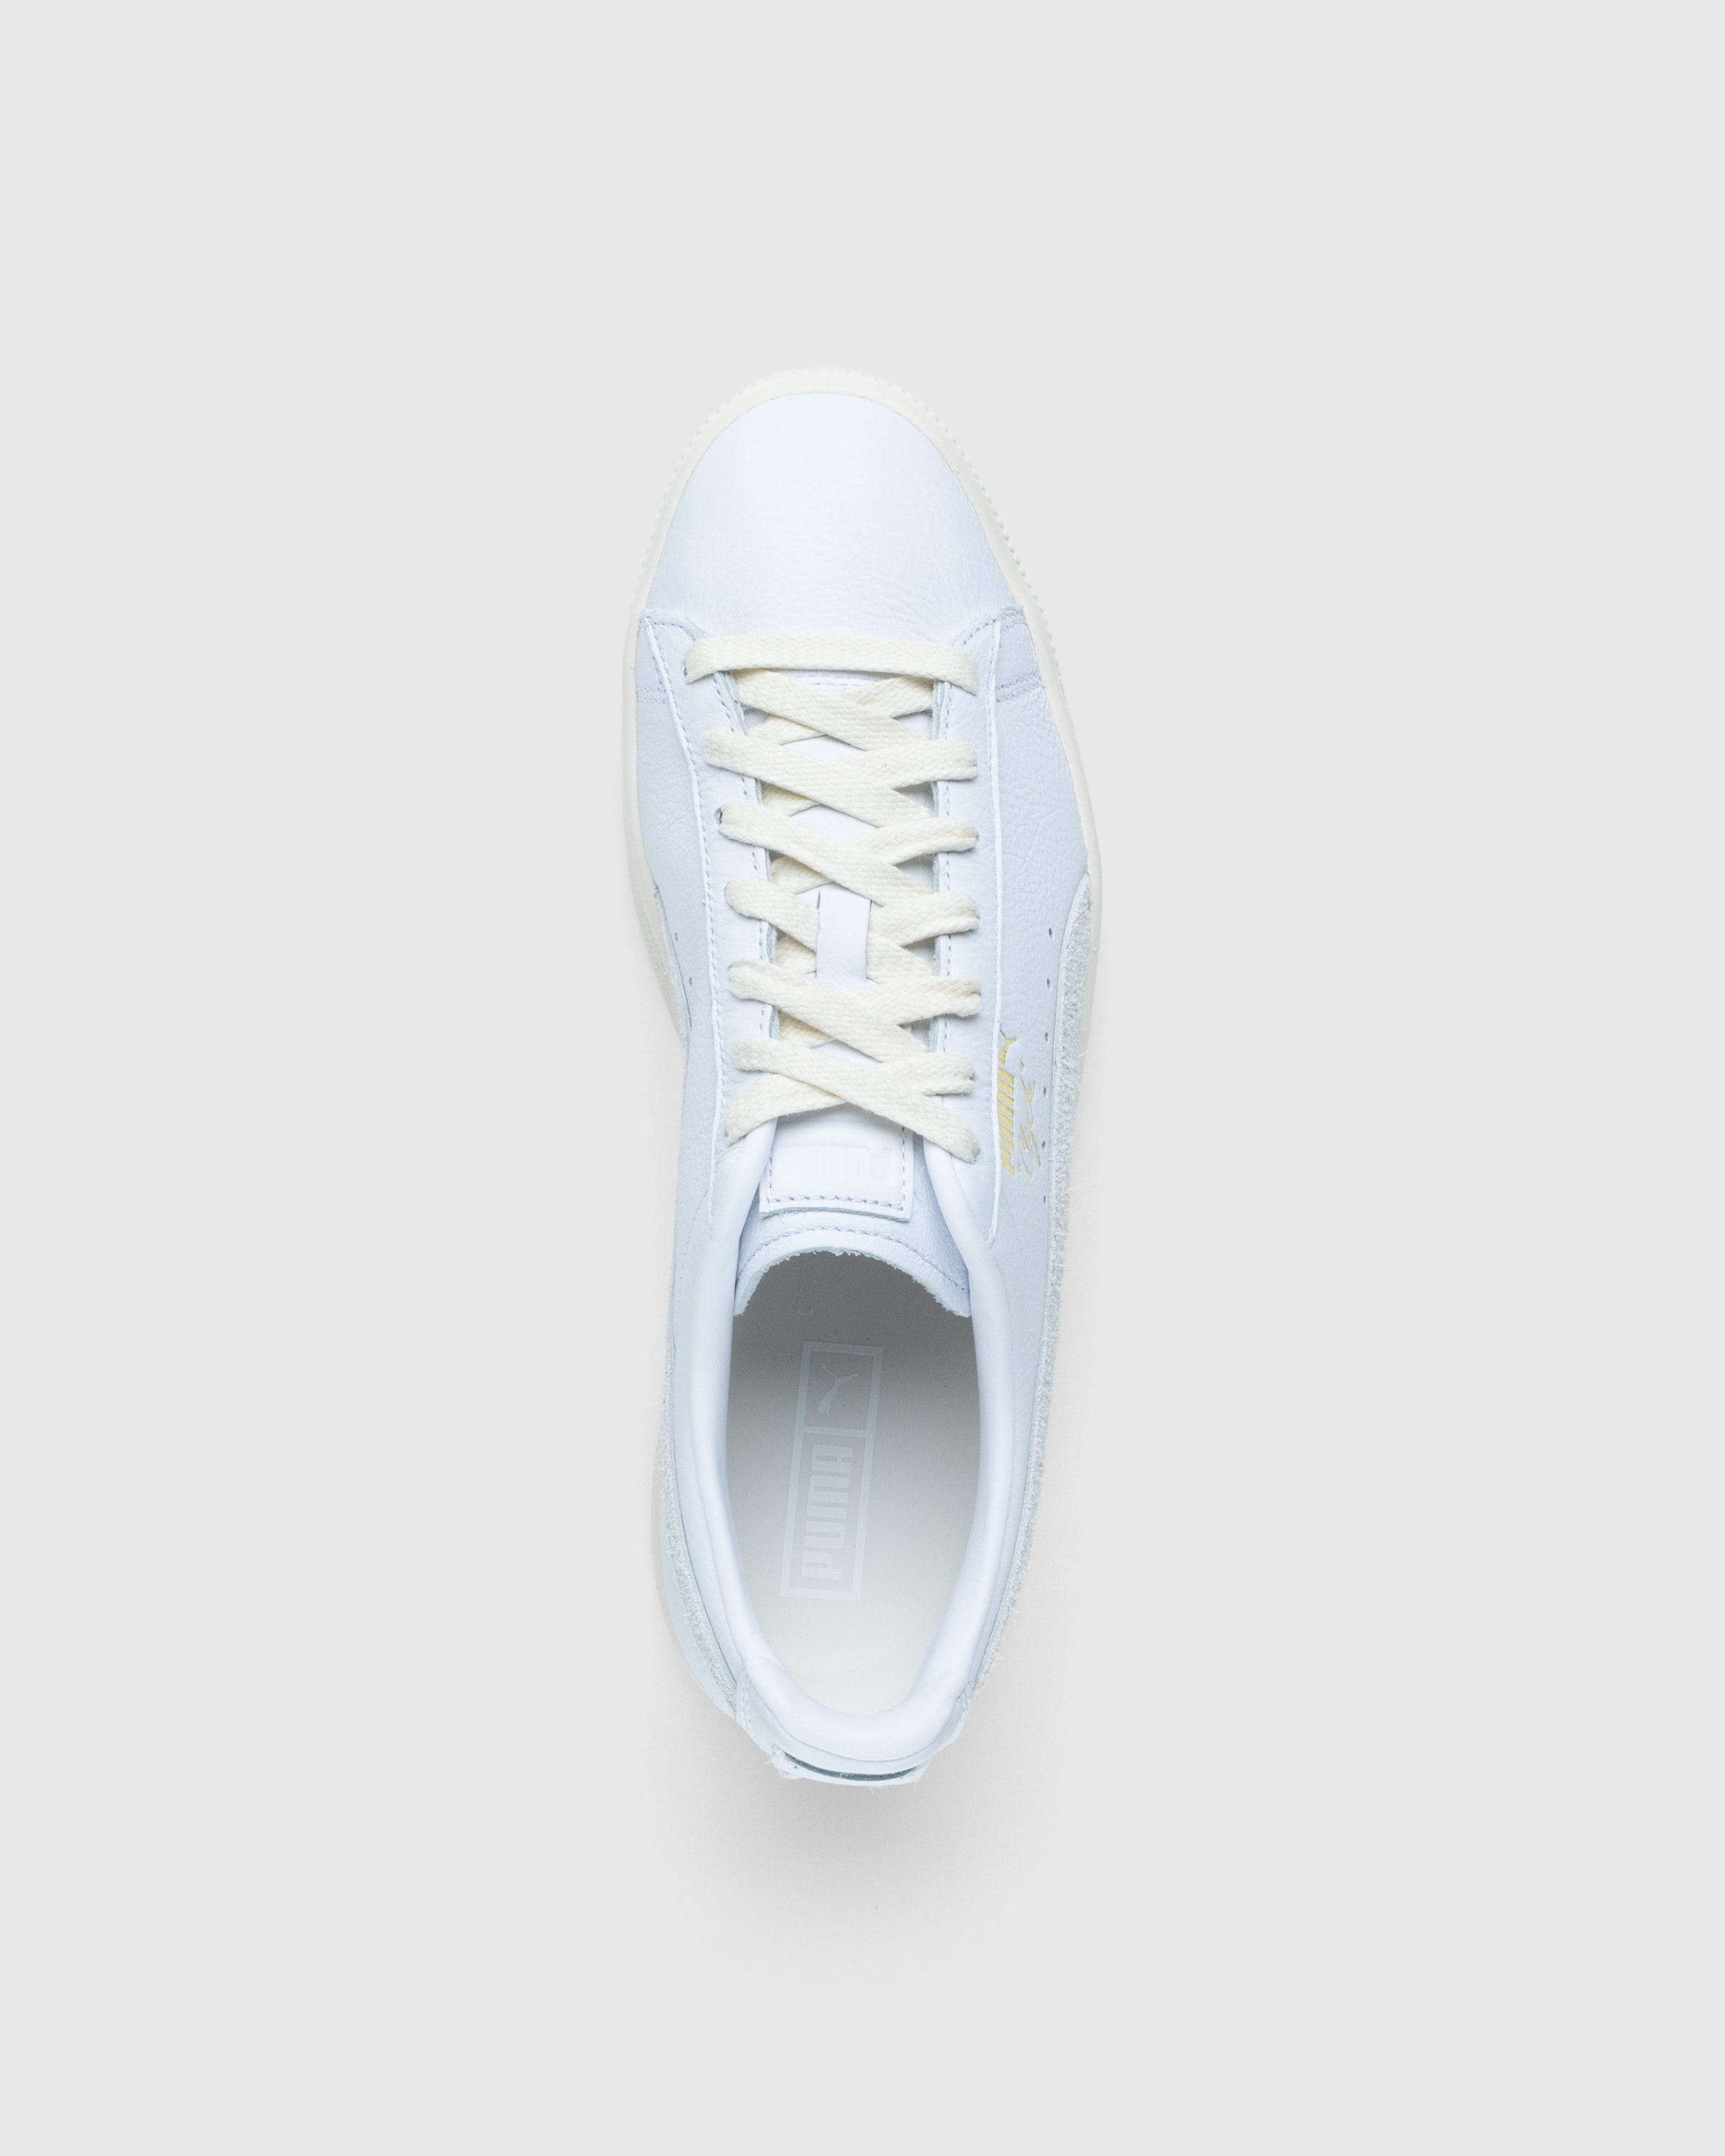 Puma - Clyde Base White - Footwear - White - Image 5